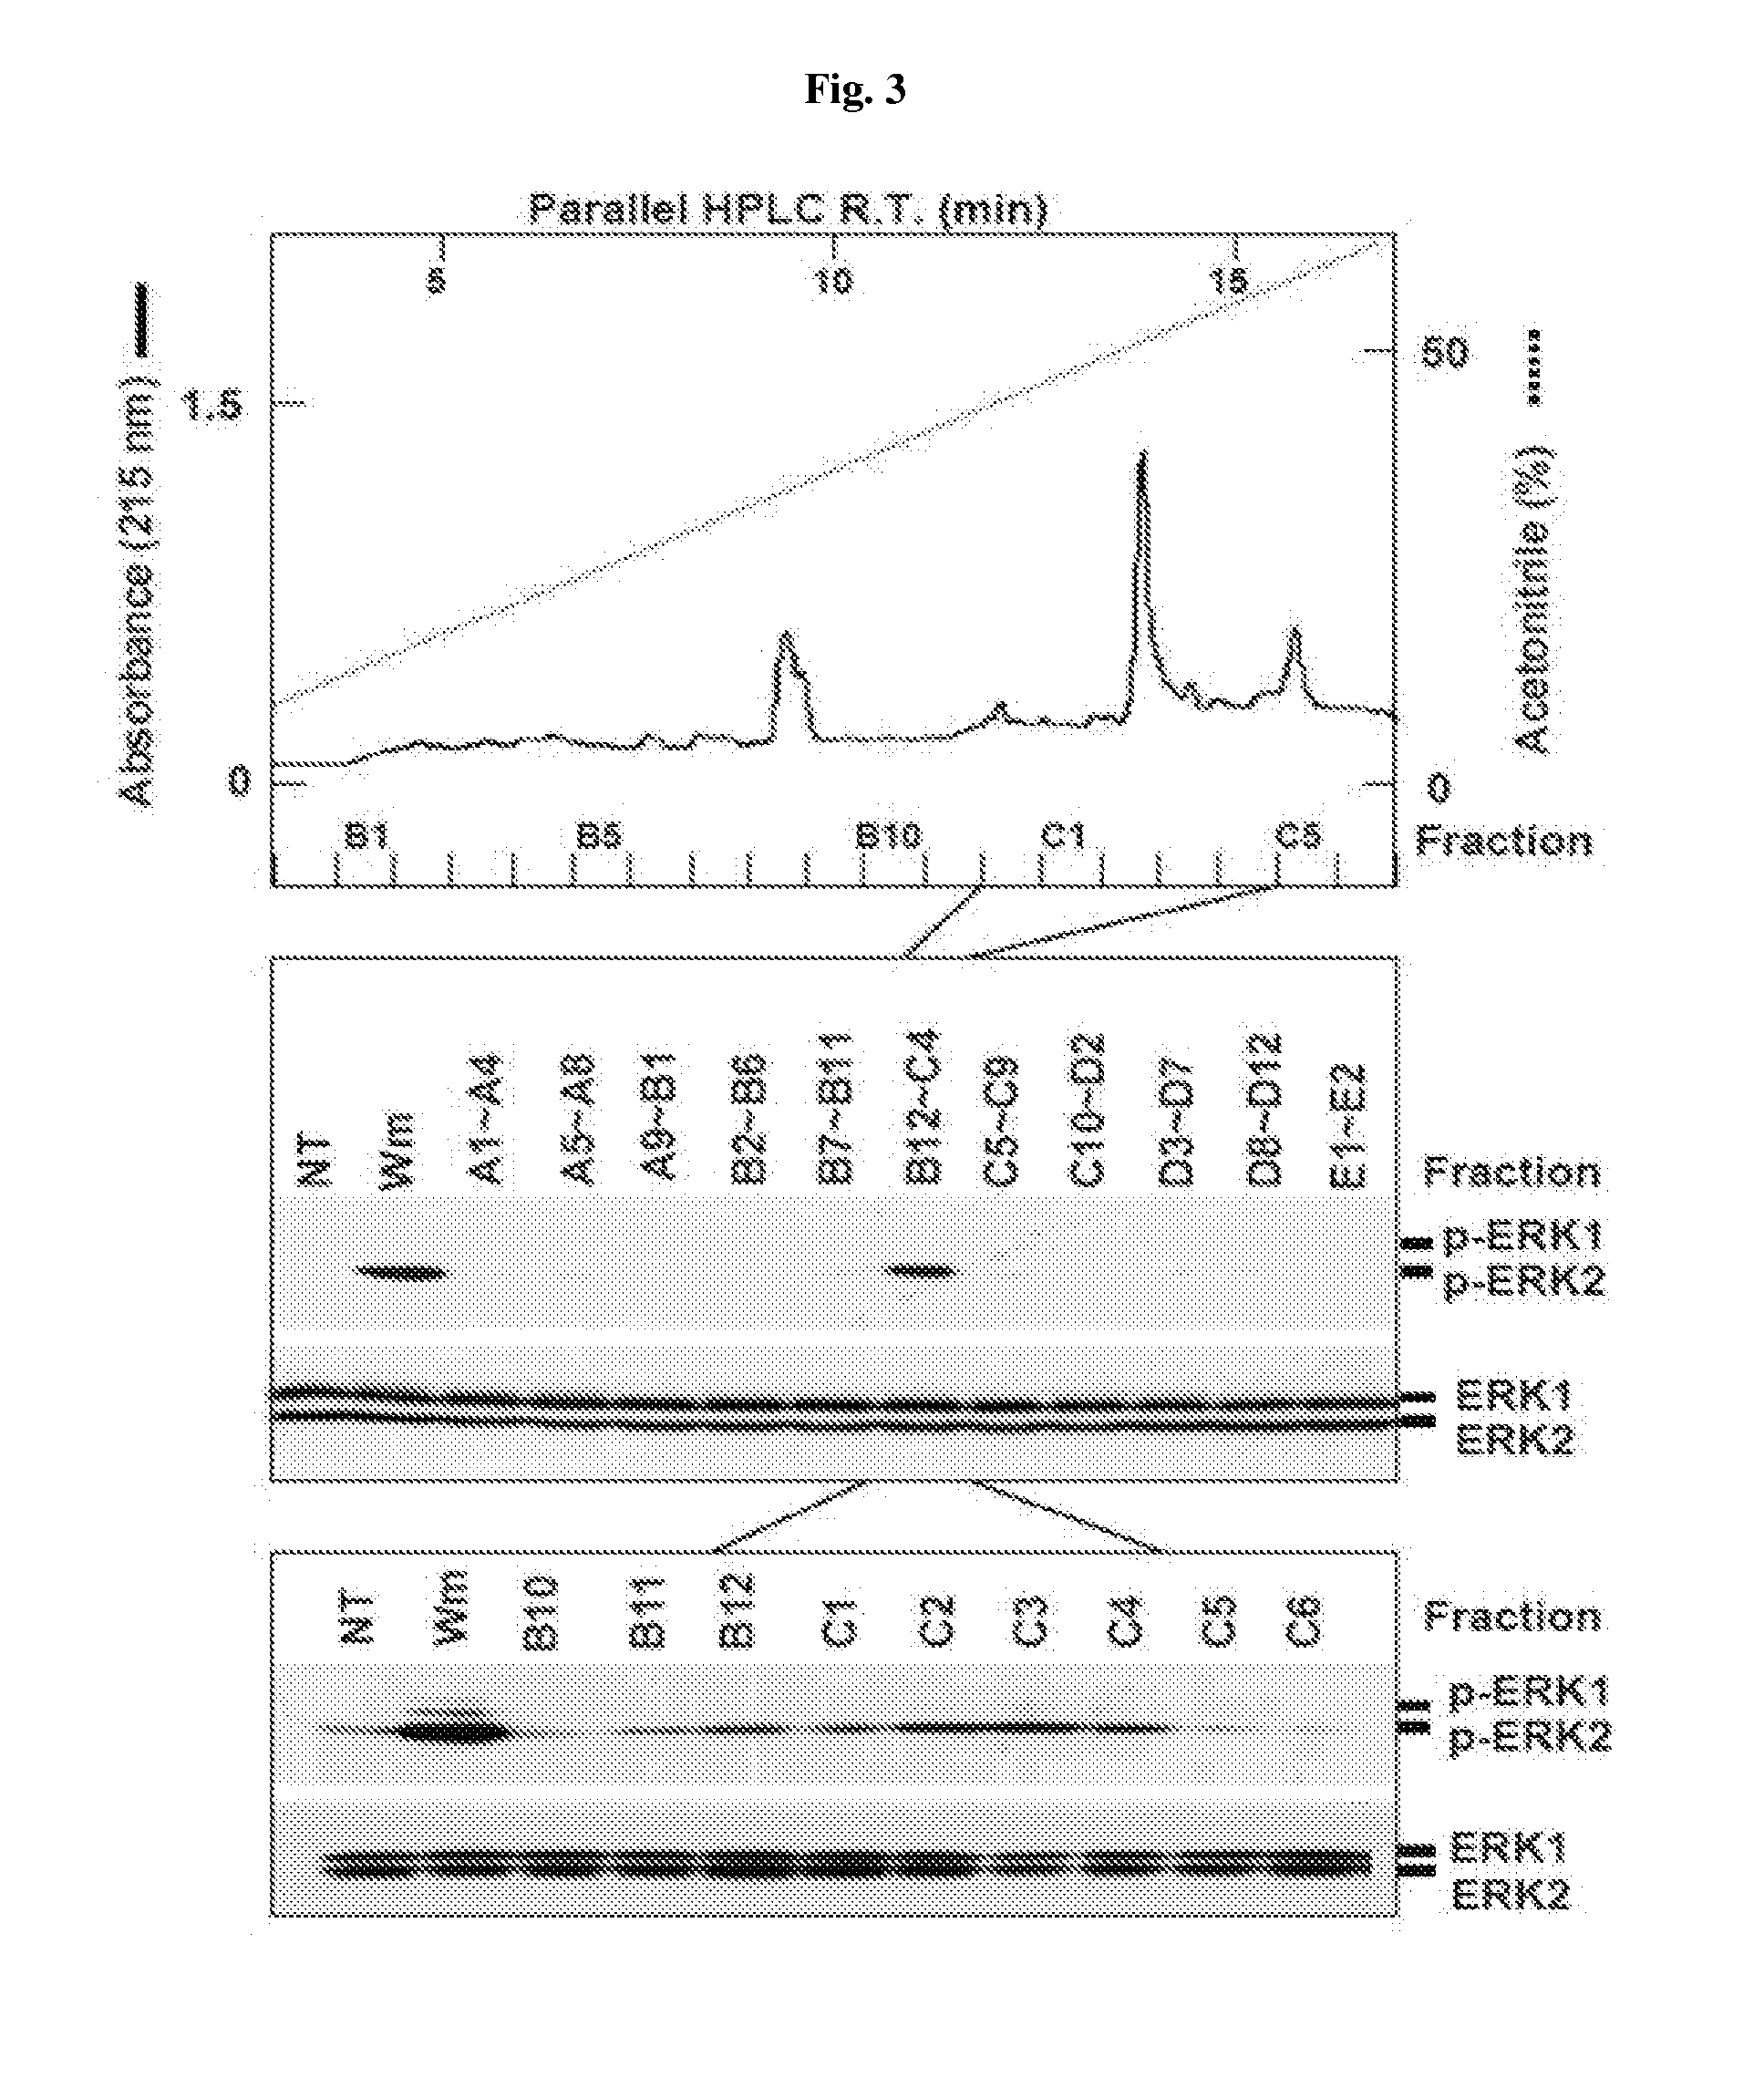 Pharmaceutical Composition Using Connective-tissue Growth Factor